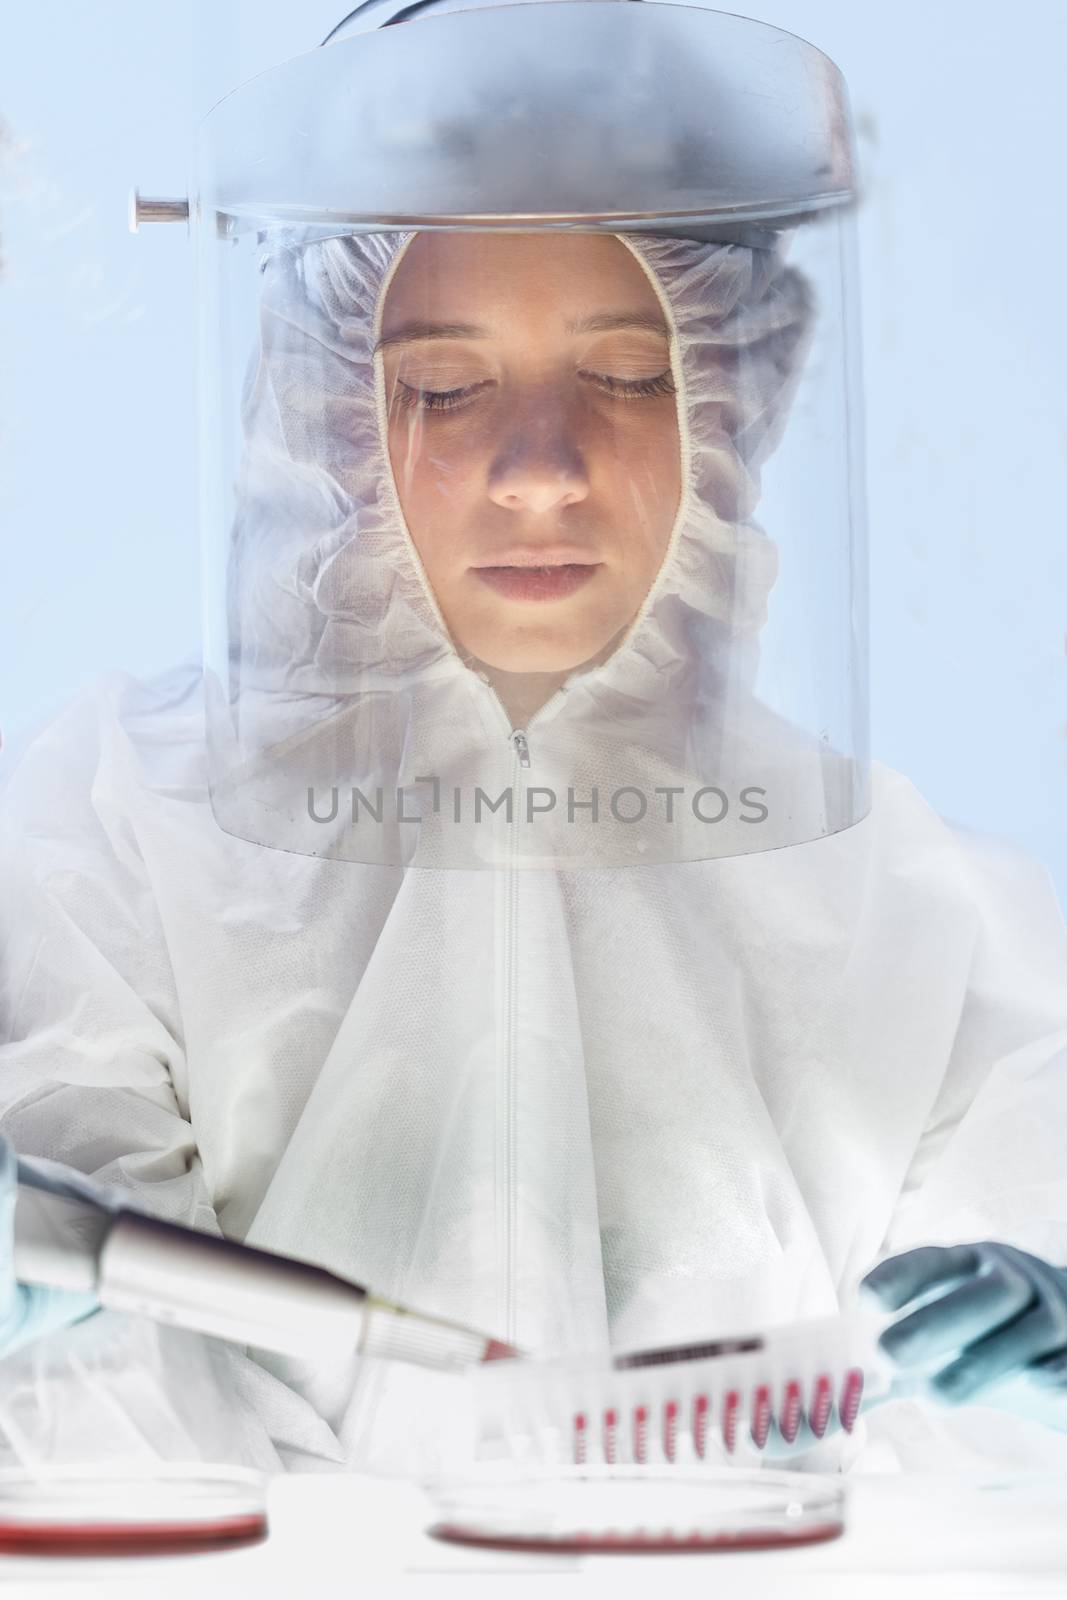 Scientist working in the corona virus vaccine development laboratory research with a highest degree of protection gear. Coronavirus pandemic concept. Development of virus treatment drug.